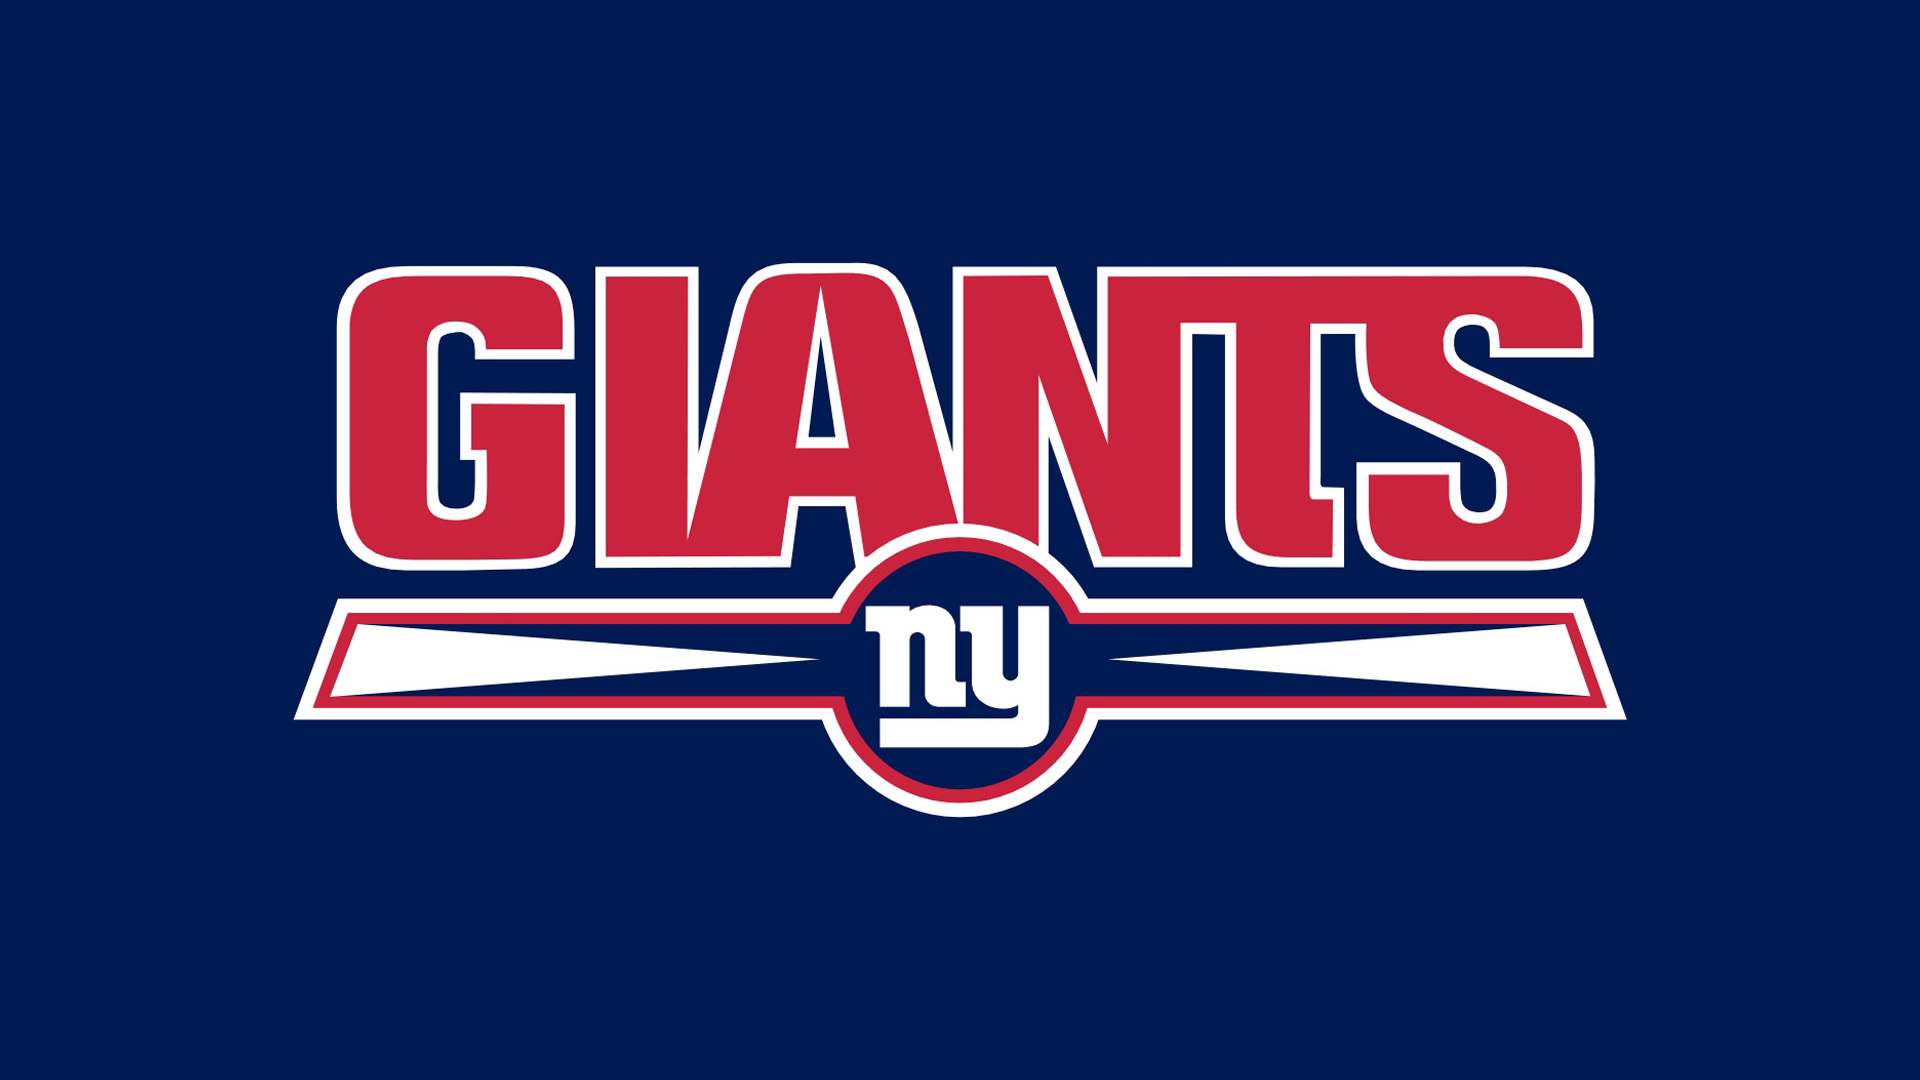 1920x1080 Free download New York Giants Wallpapers Hd Wallpapers [] for your Desktop, Mobile \u0026 Tablet | Explore 48+ NY Giants Wallpaper Desktop | NY Giants Wallpaper, NY Giants Wallpapers, NY Giants Wallpaper HD